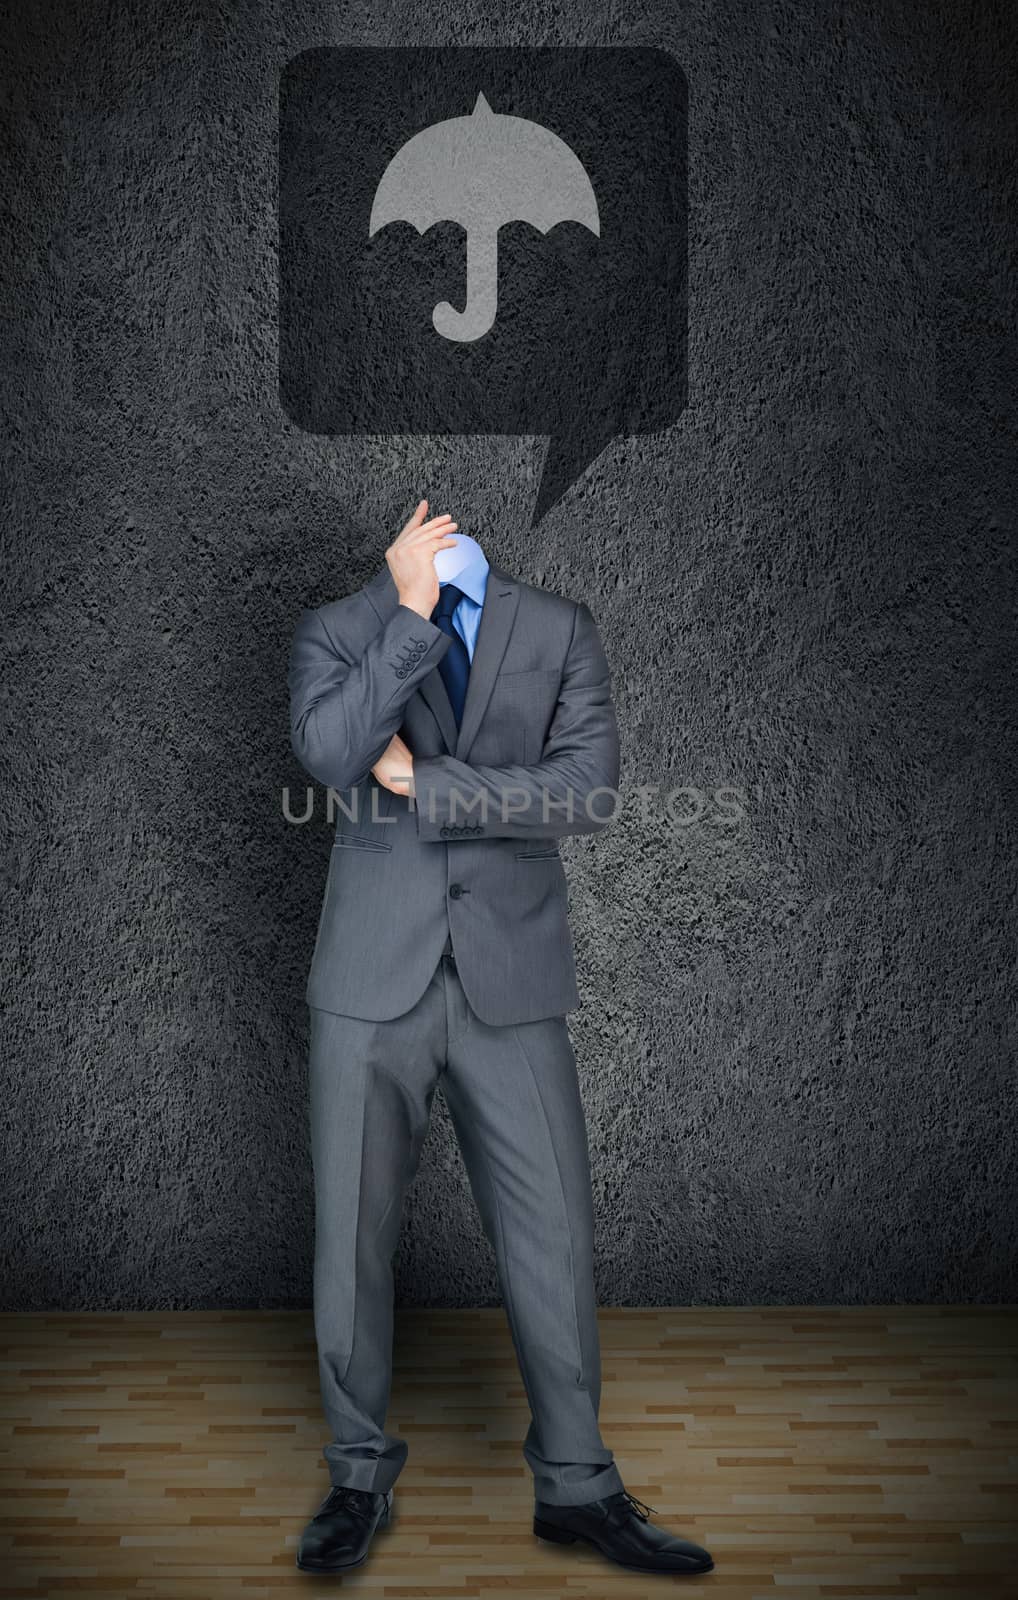 Composite image of headless businessman with umbrella in speech bubble in grey room